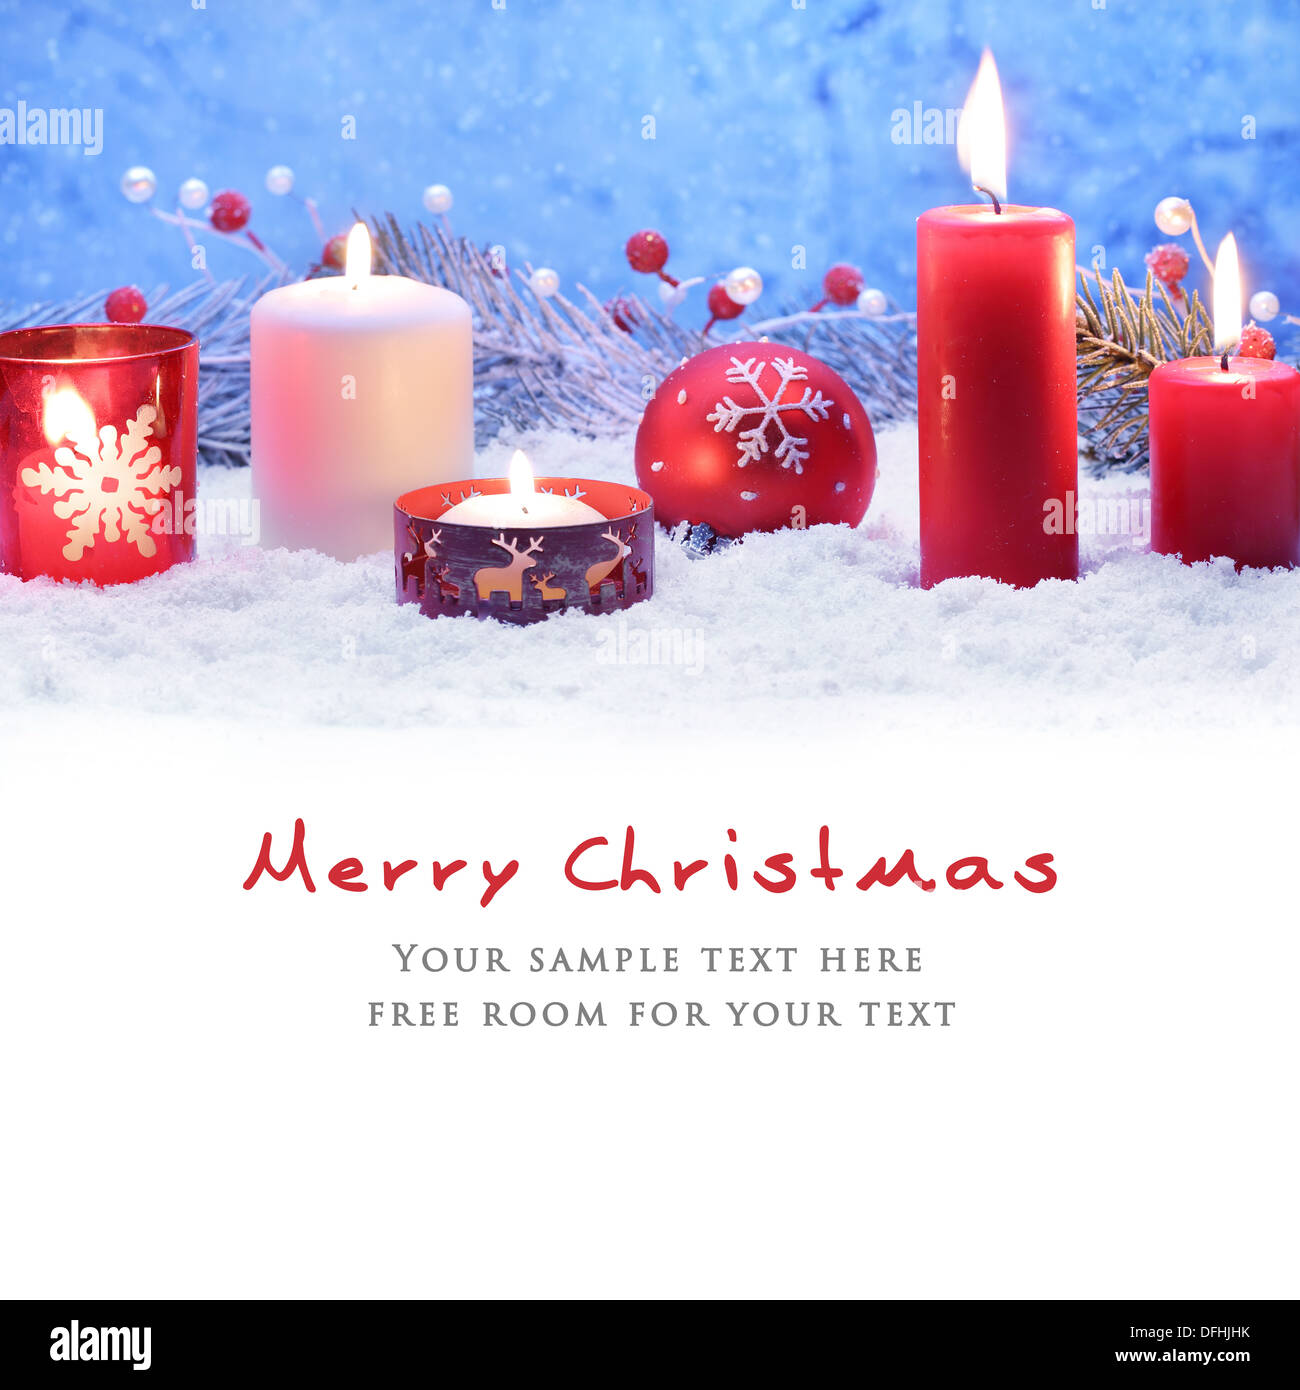 Christmas decoration with candles and ball on snow. Stock Photo